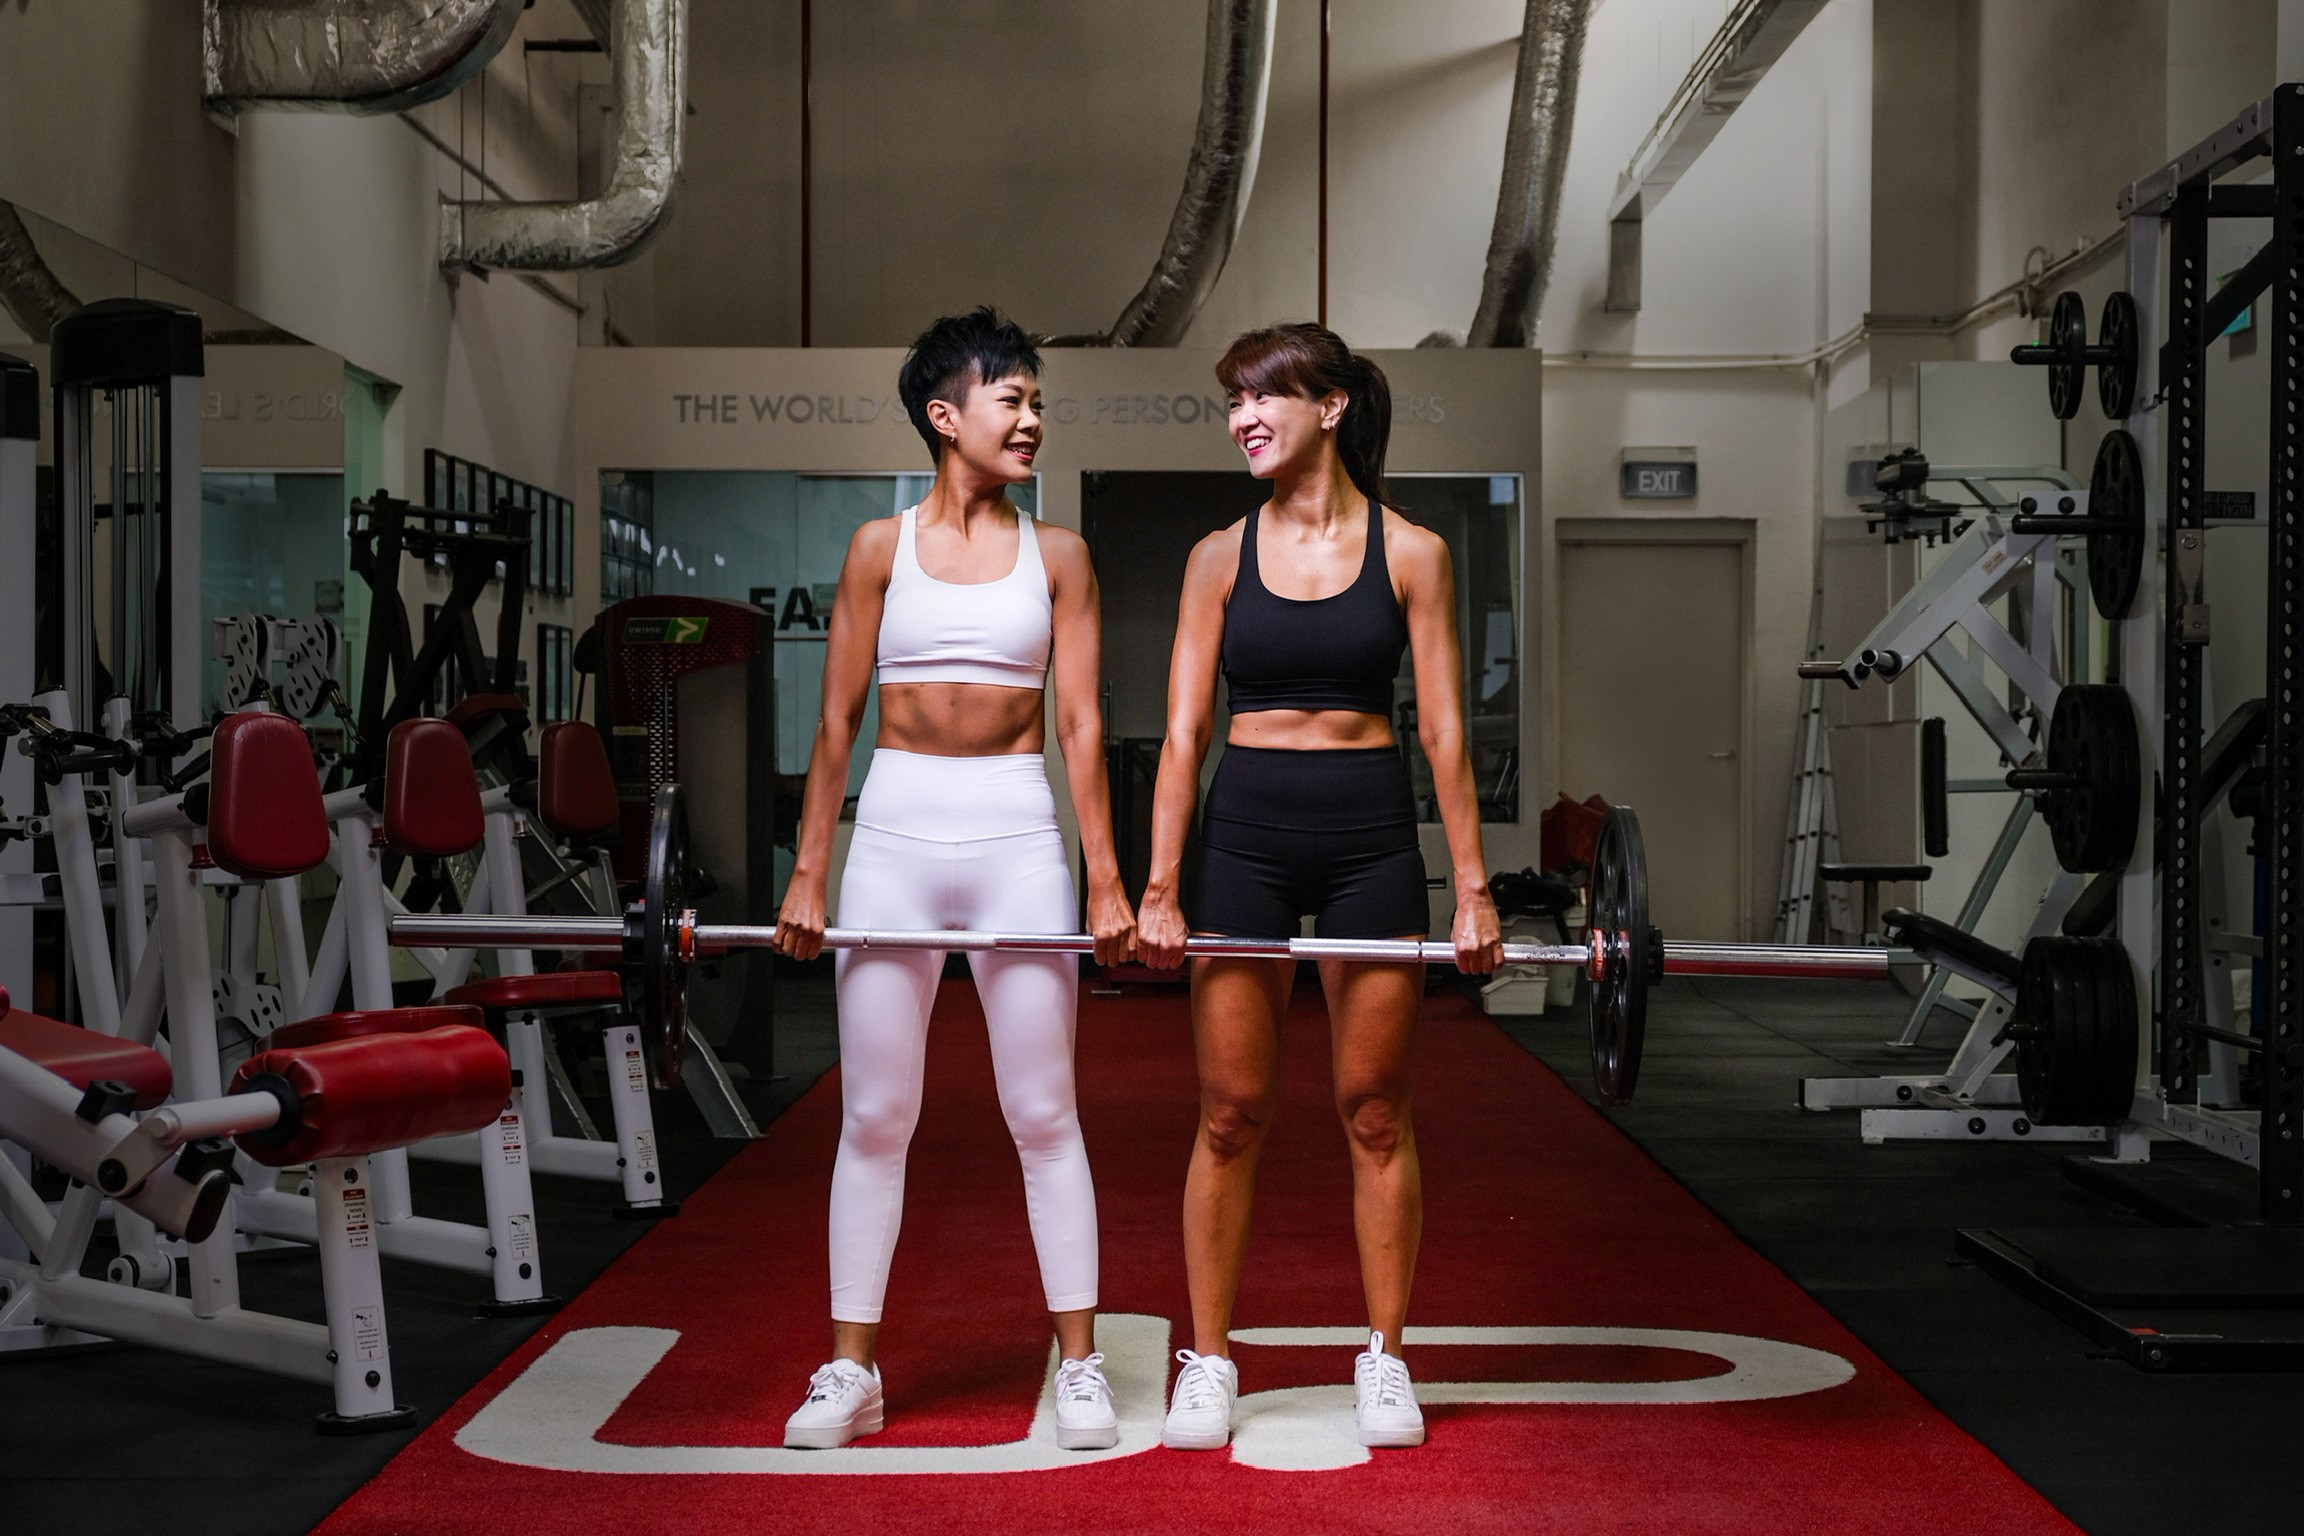 Cancer survivors and fitness warriors: Julianne Danielle Lim and Kelly Loh